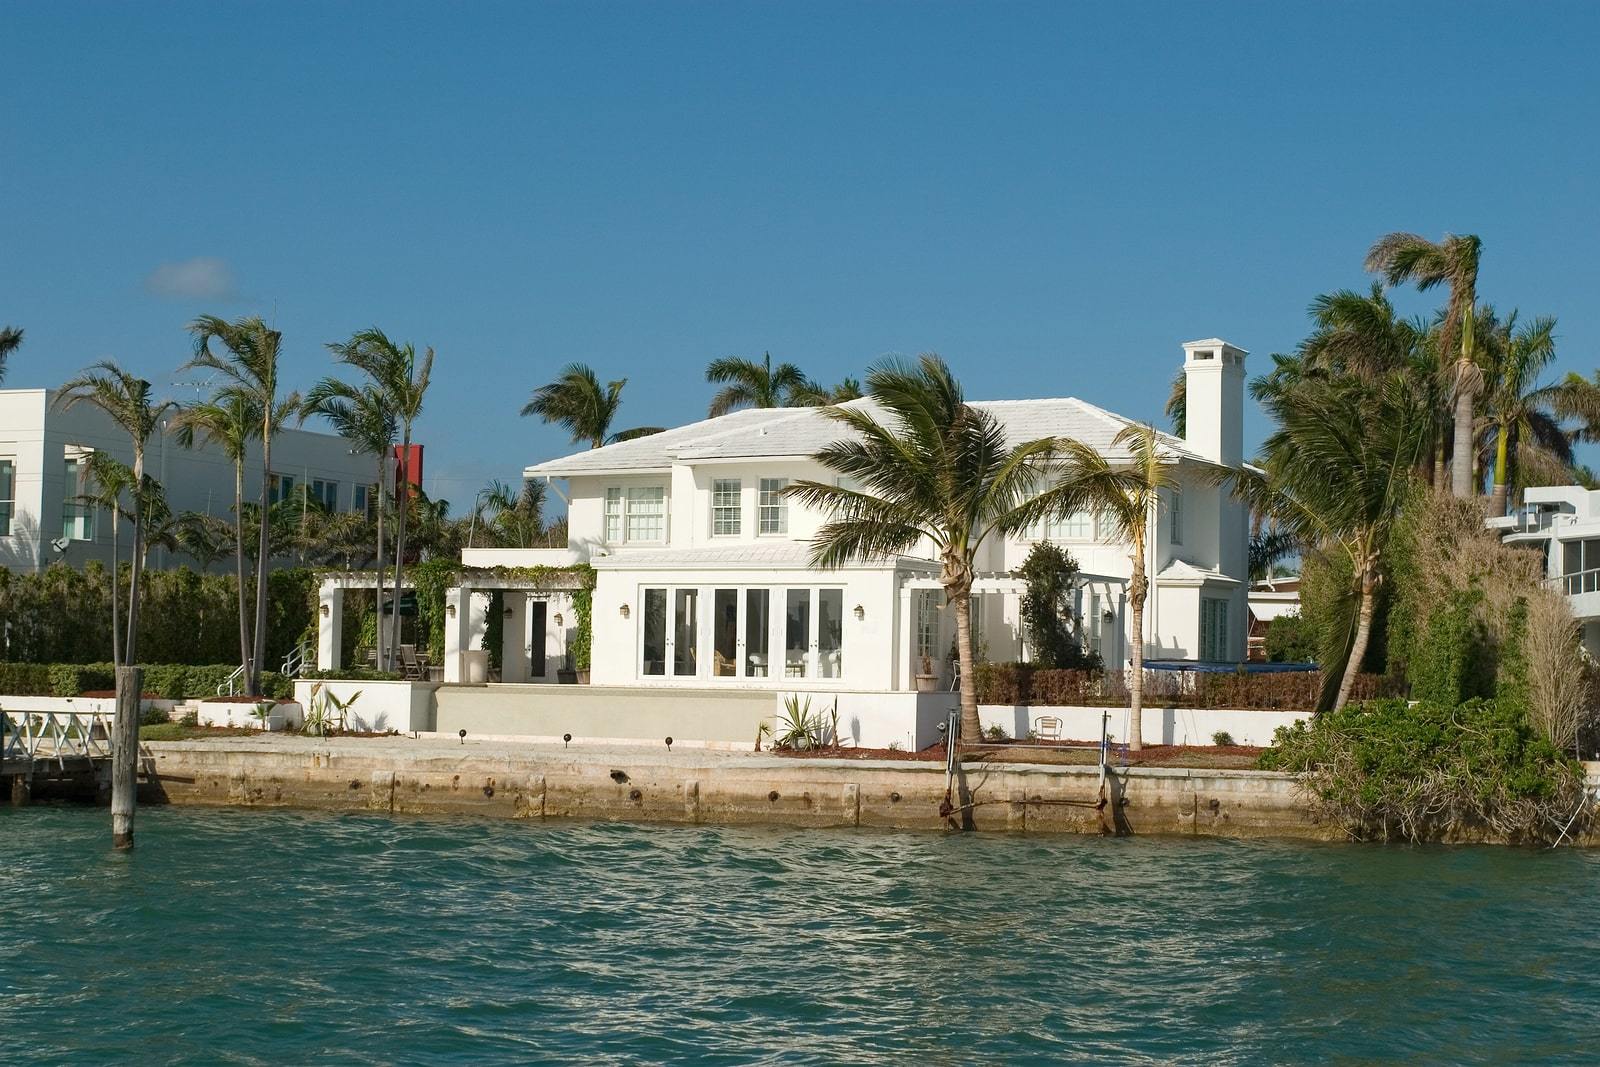 Large luxury home in the Florida Keys, located right on the waterfront